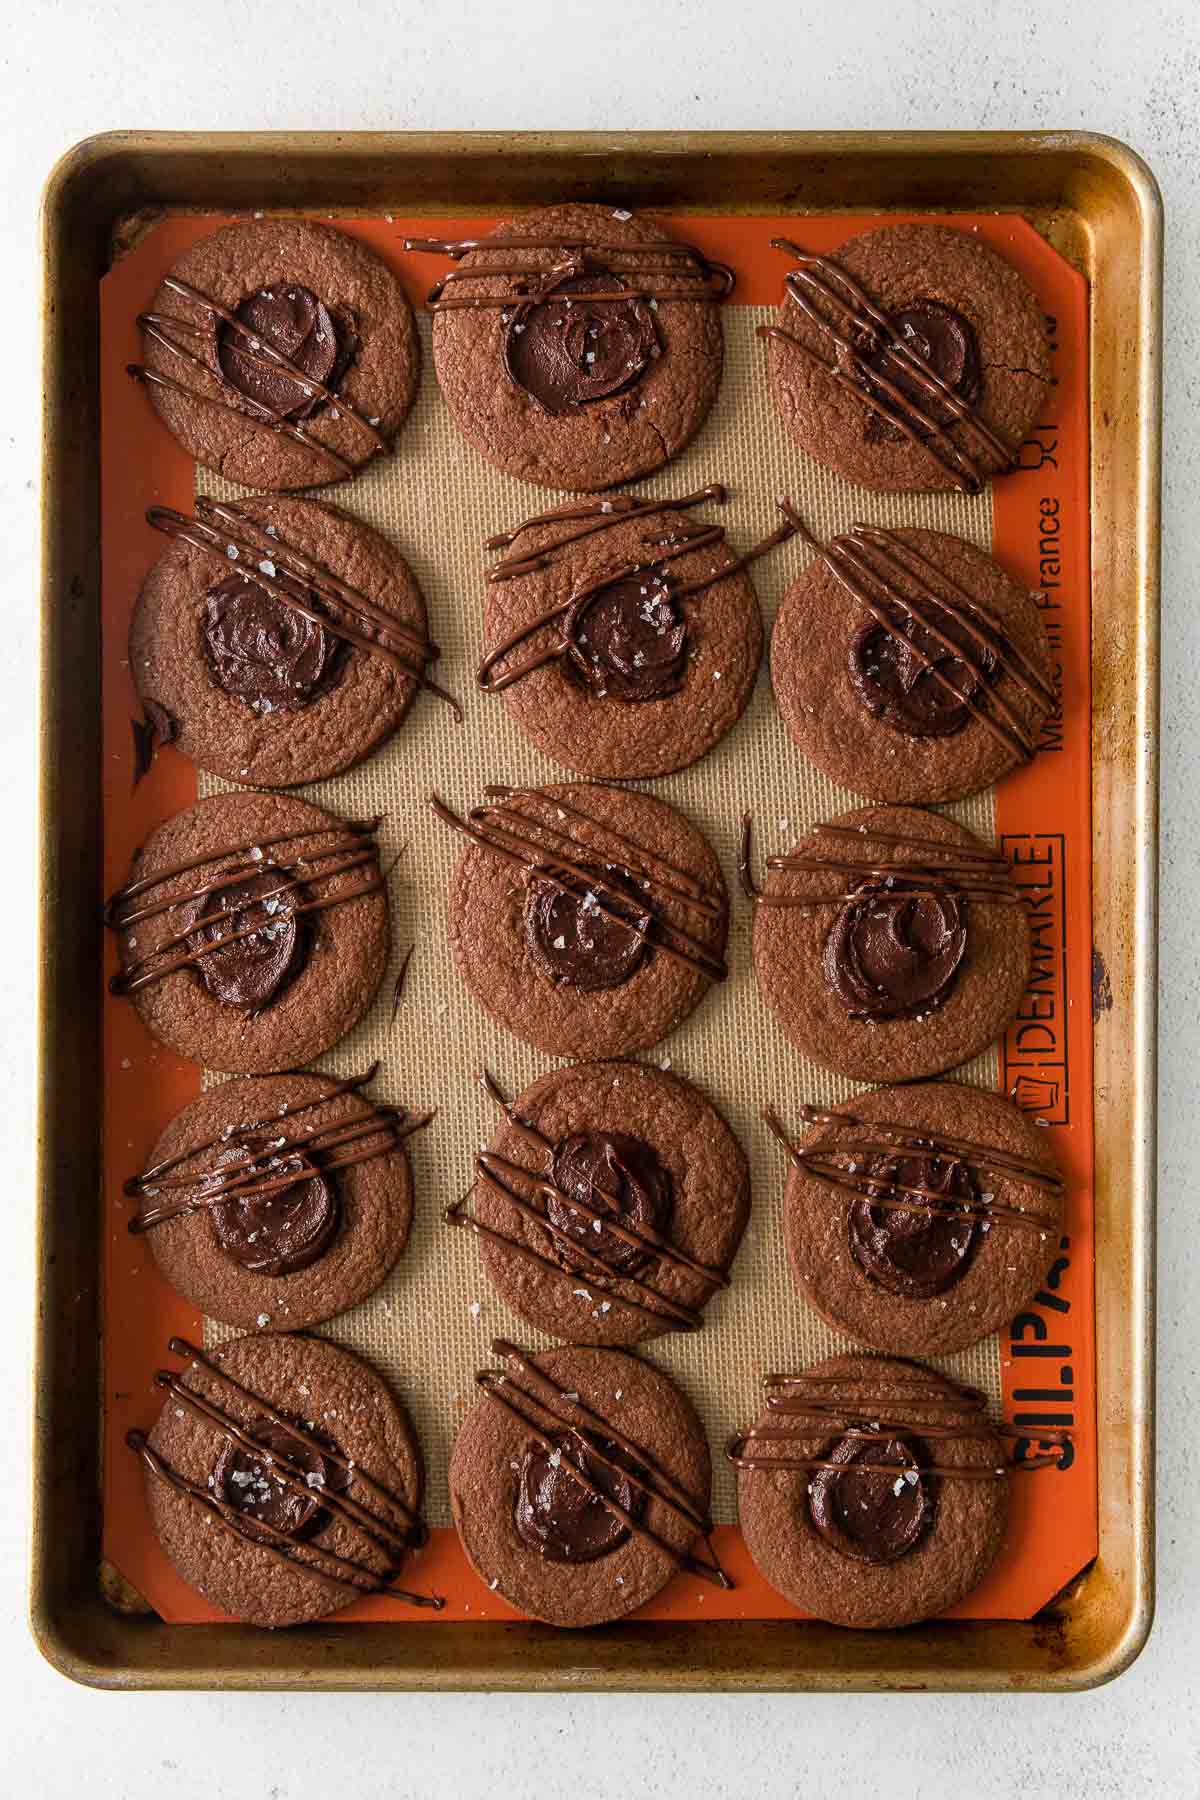 fifteen double chocolate thumbprint cookies with chocolate filling on a baking sheet.